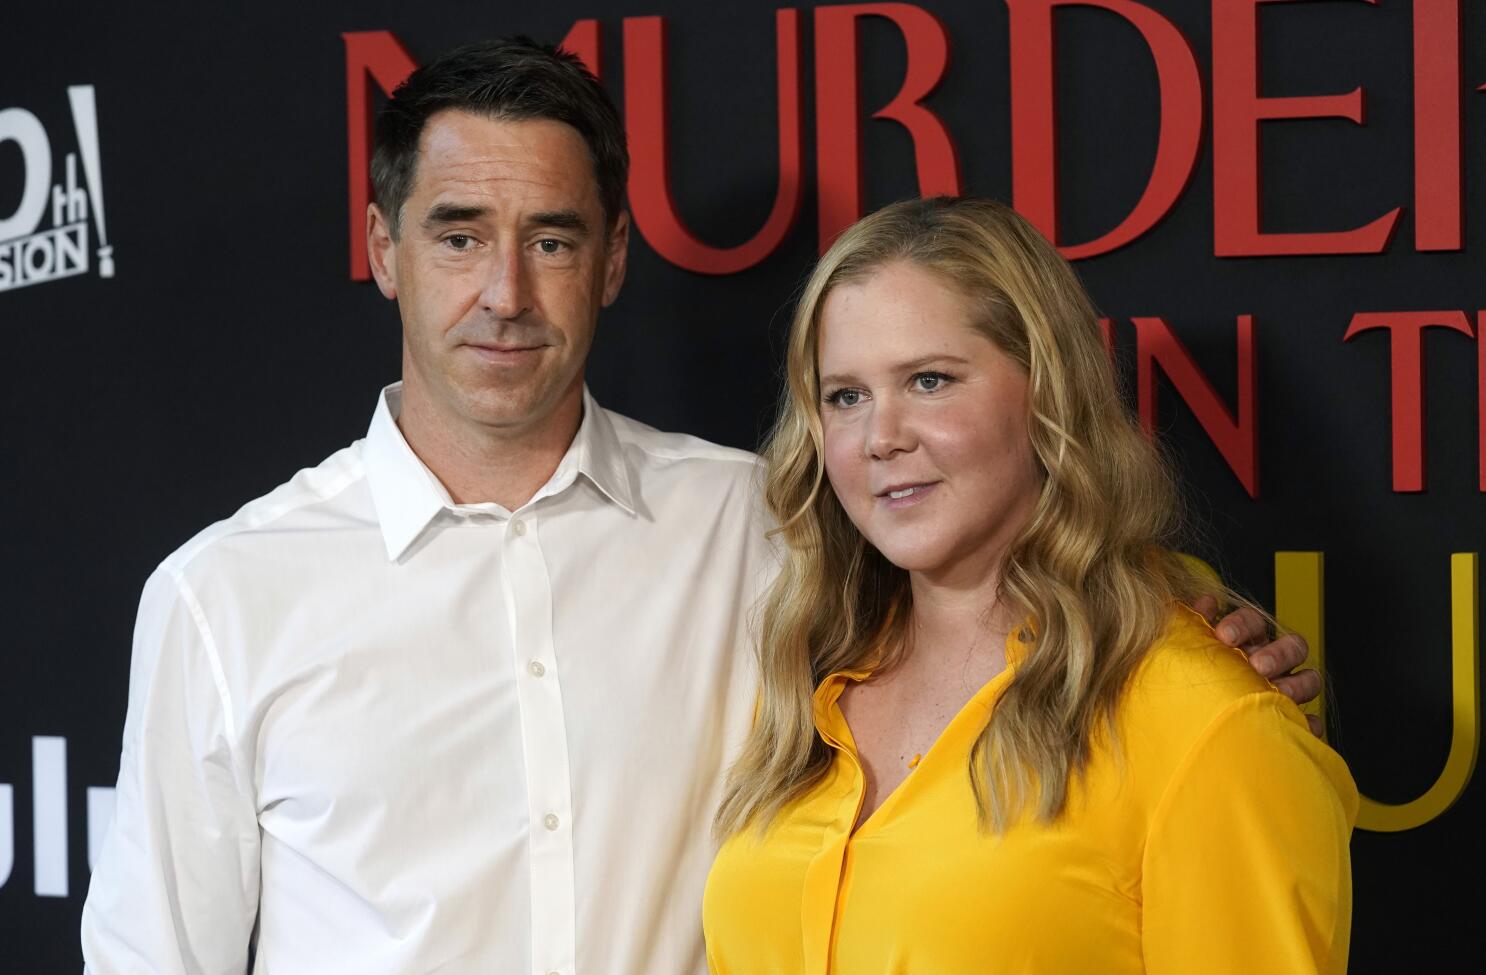 Amy Schumer Shares Funny New Photo with Son Gene